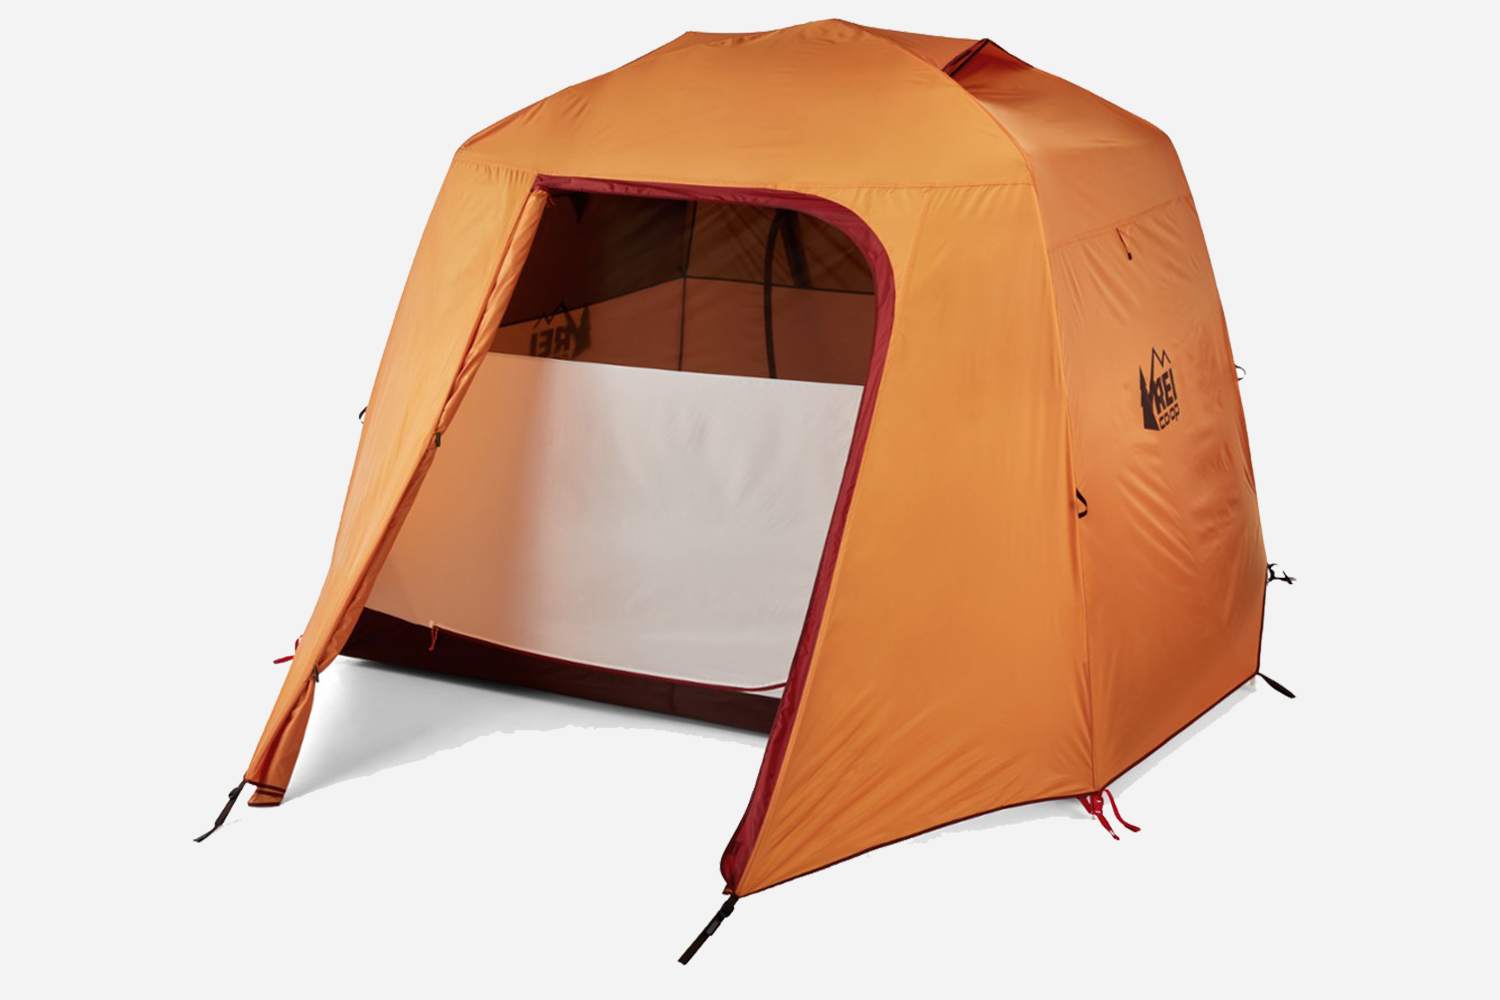 REI Grand Hut 4 Tent 4th of July Sale